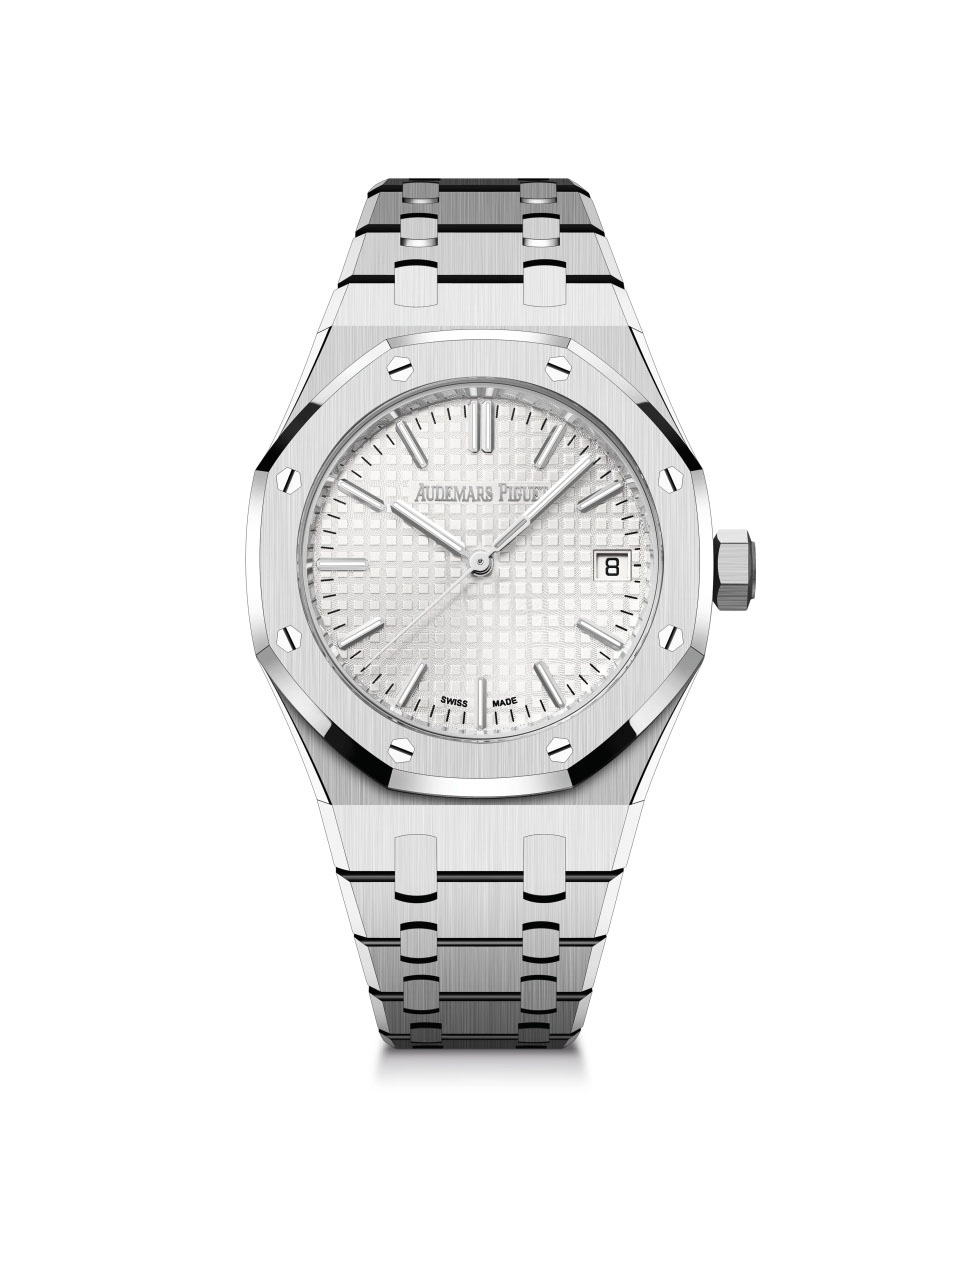 Royal Oak Selfwinding / 37mm; stainless steel case and bezel with silver-toned dial (15550ST.OO.1356ST.01)